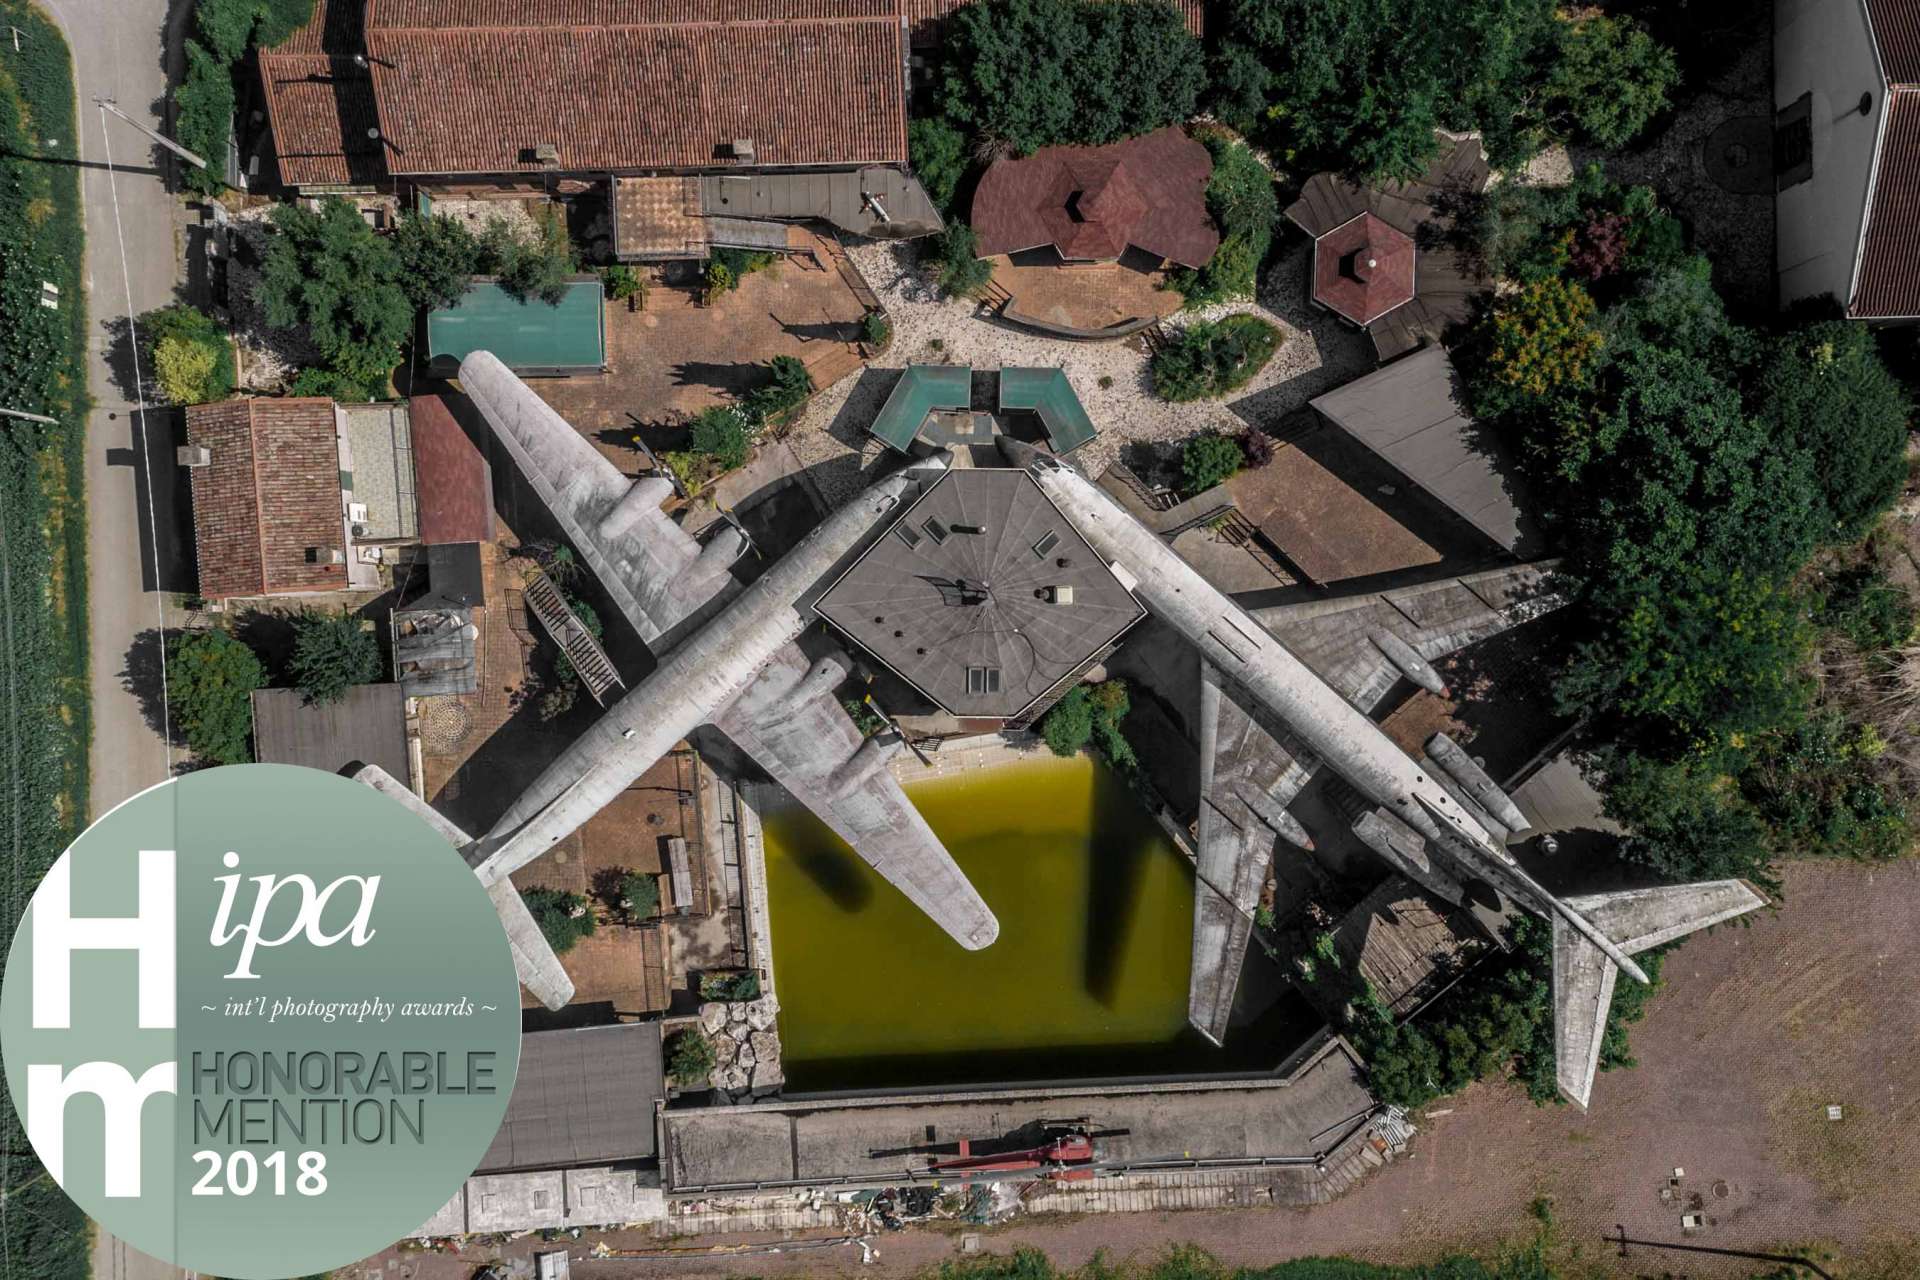 IPA 2018 International Photography Awards 2018 Enrico Pescantini Honorable Mention Lost Planes of Michelangelo